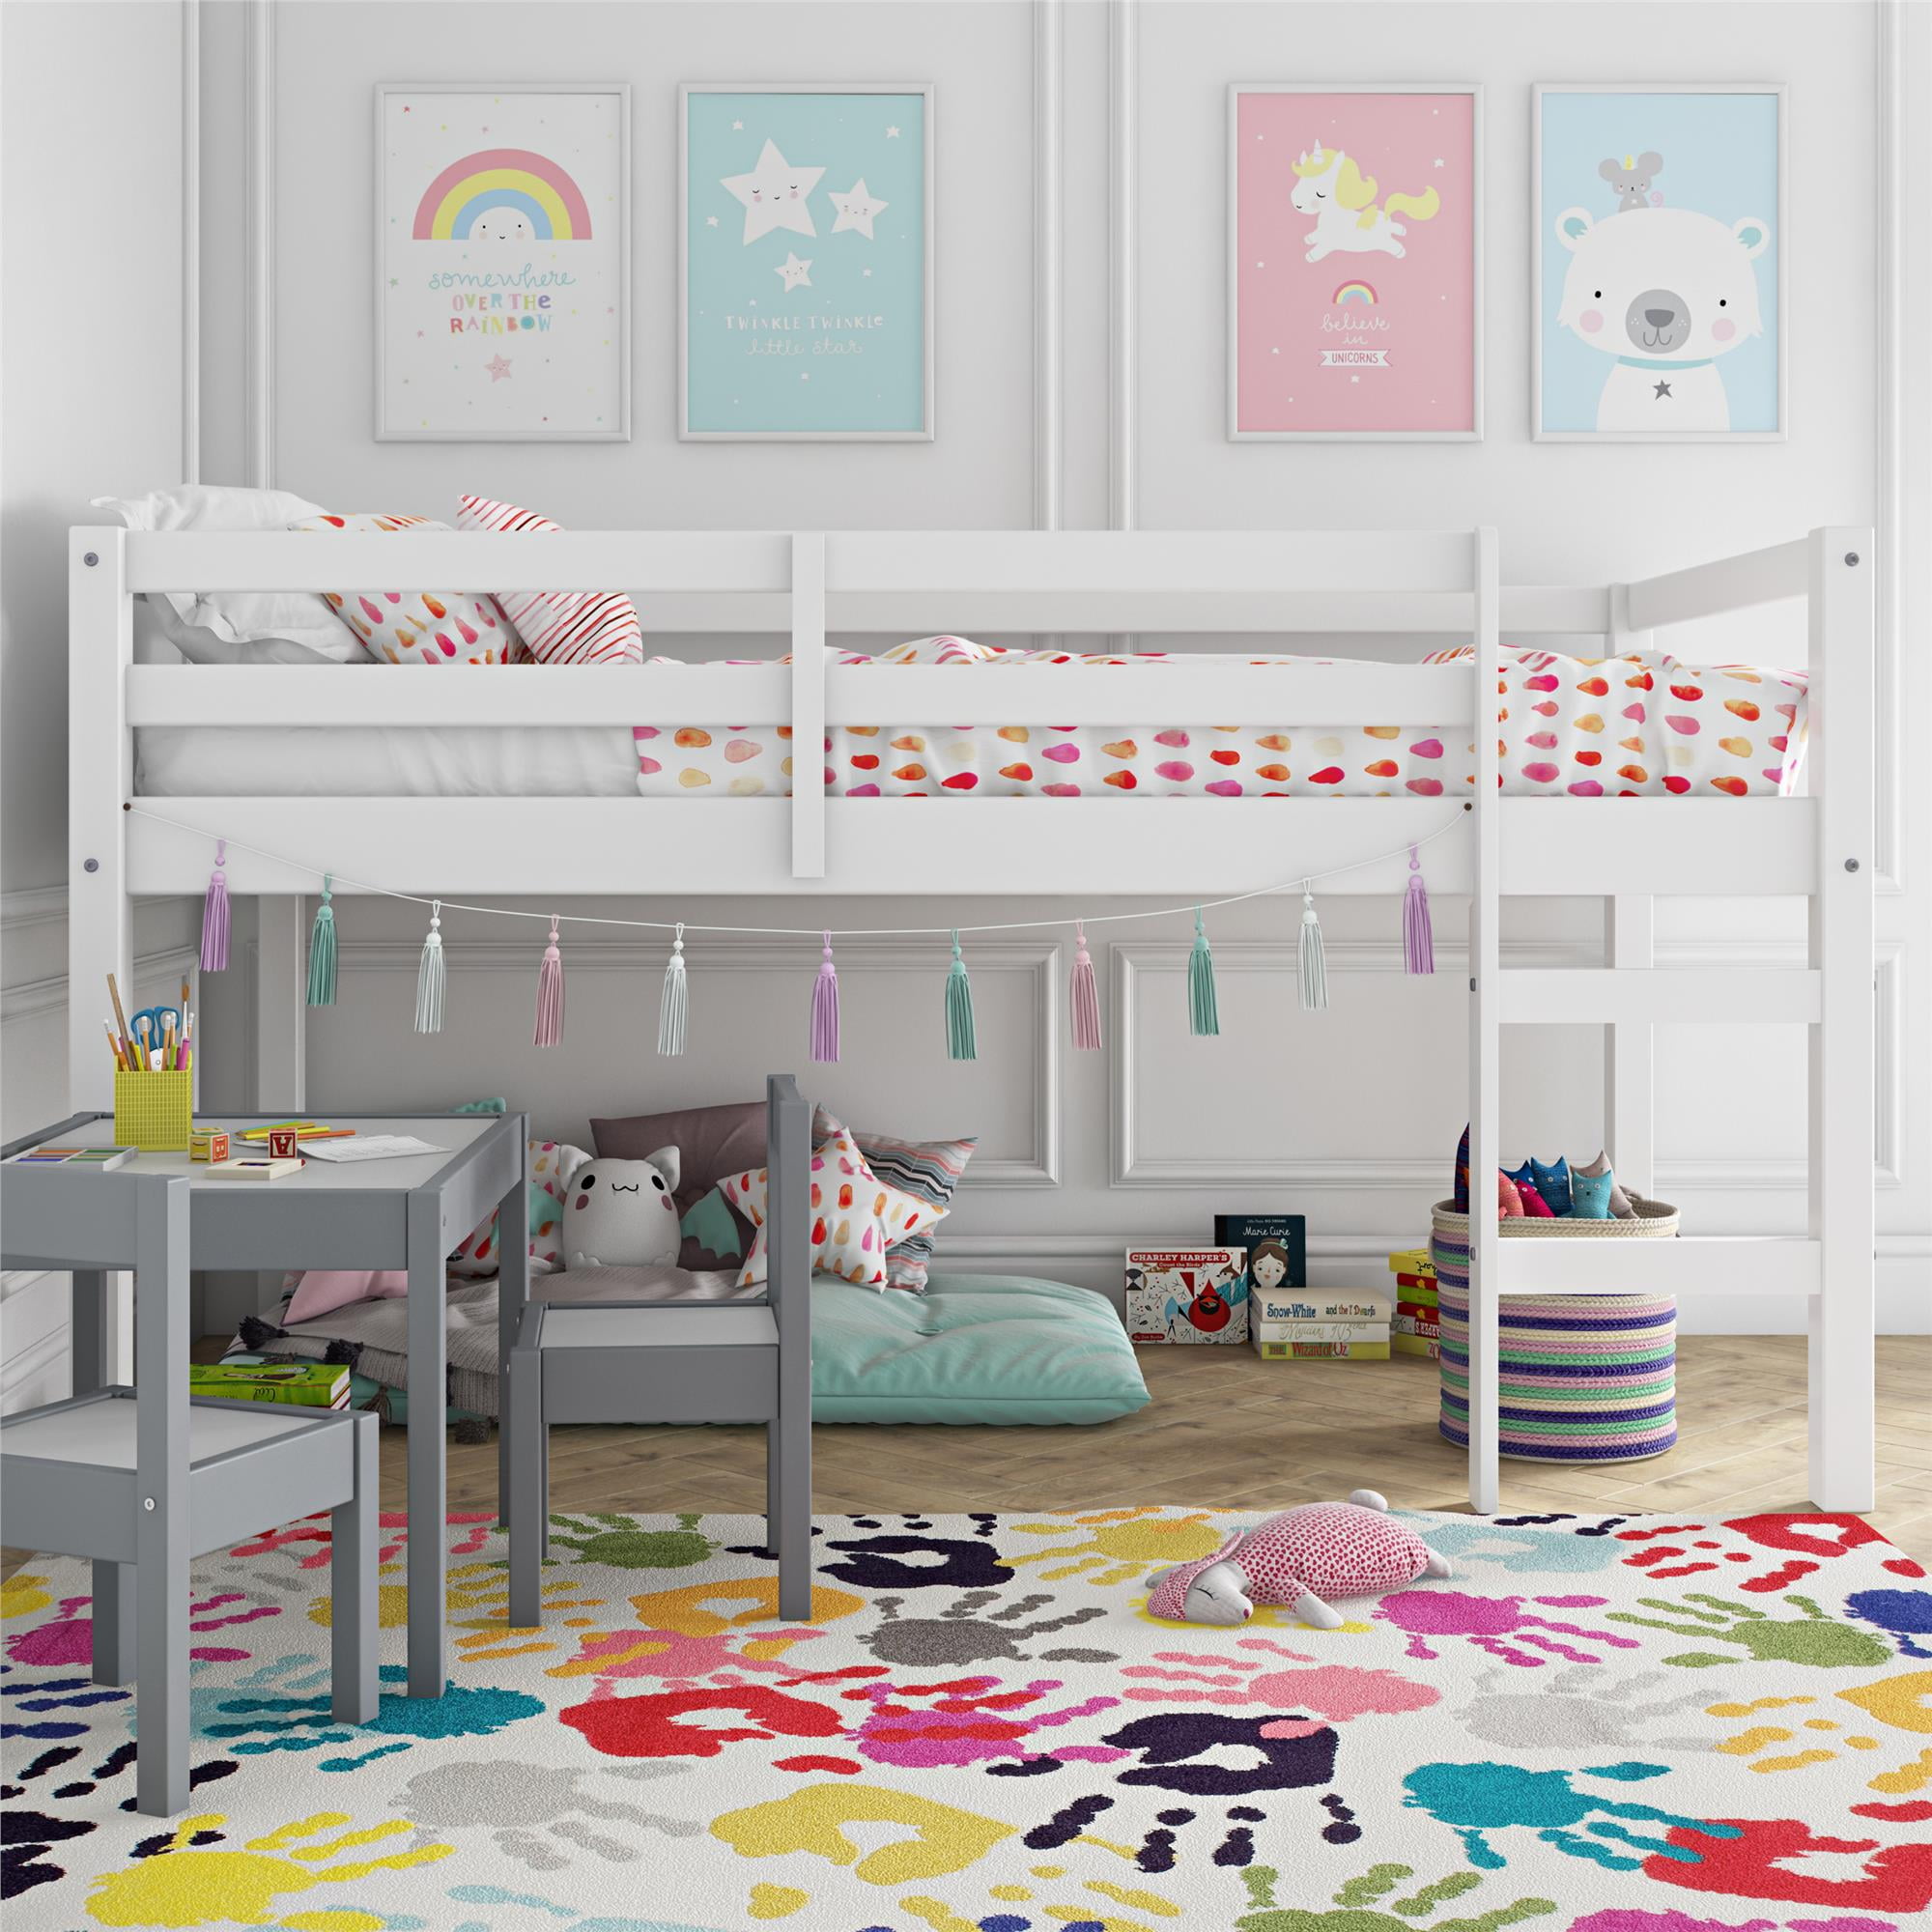 Details about   Dorel Living Bunk Bed Loft Style Twin White Traditional Wood Furniture DL2906WDC 